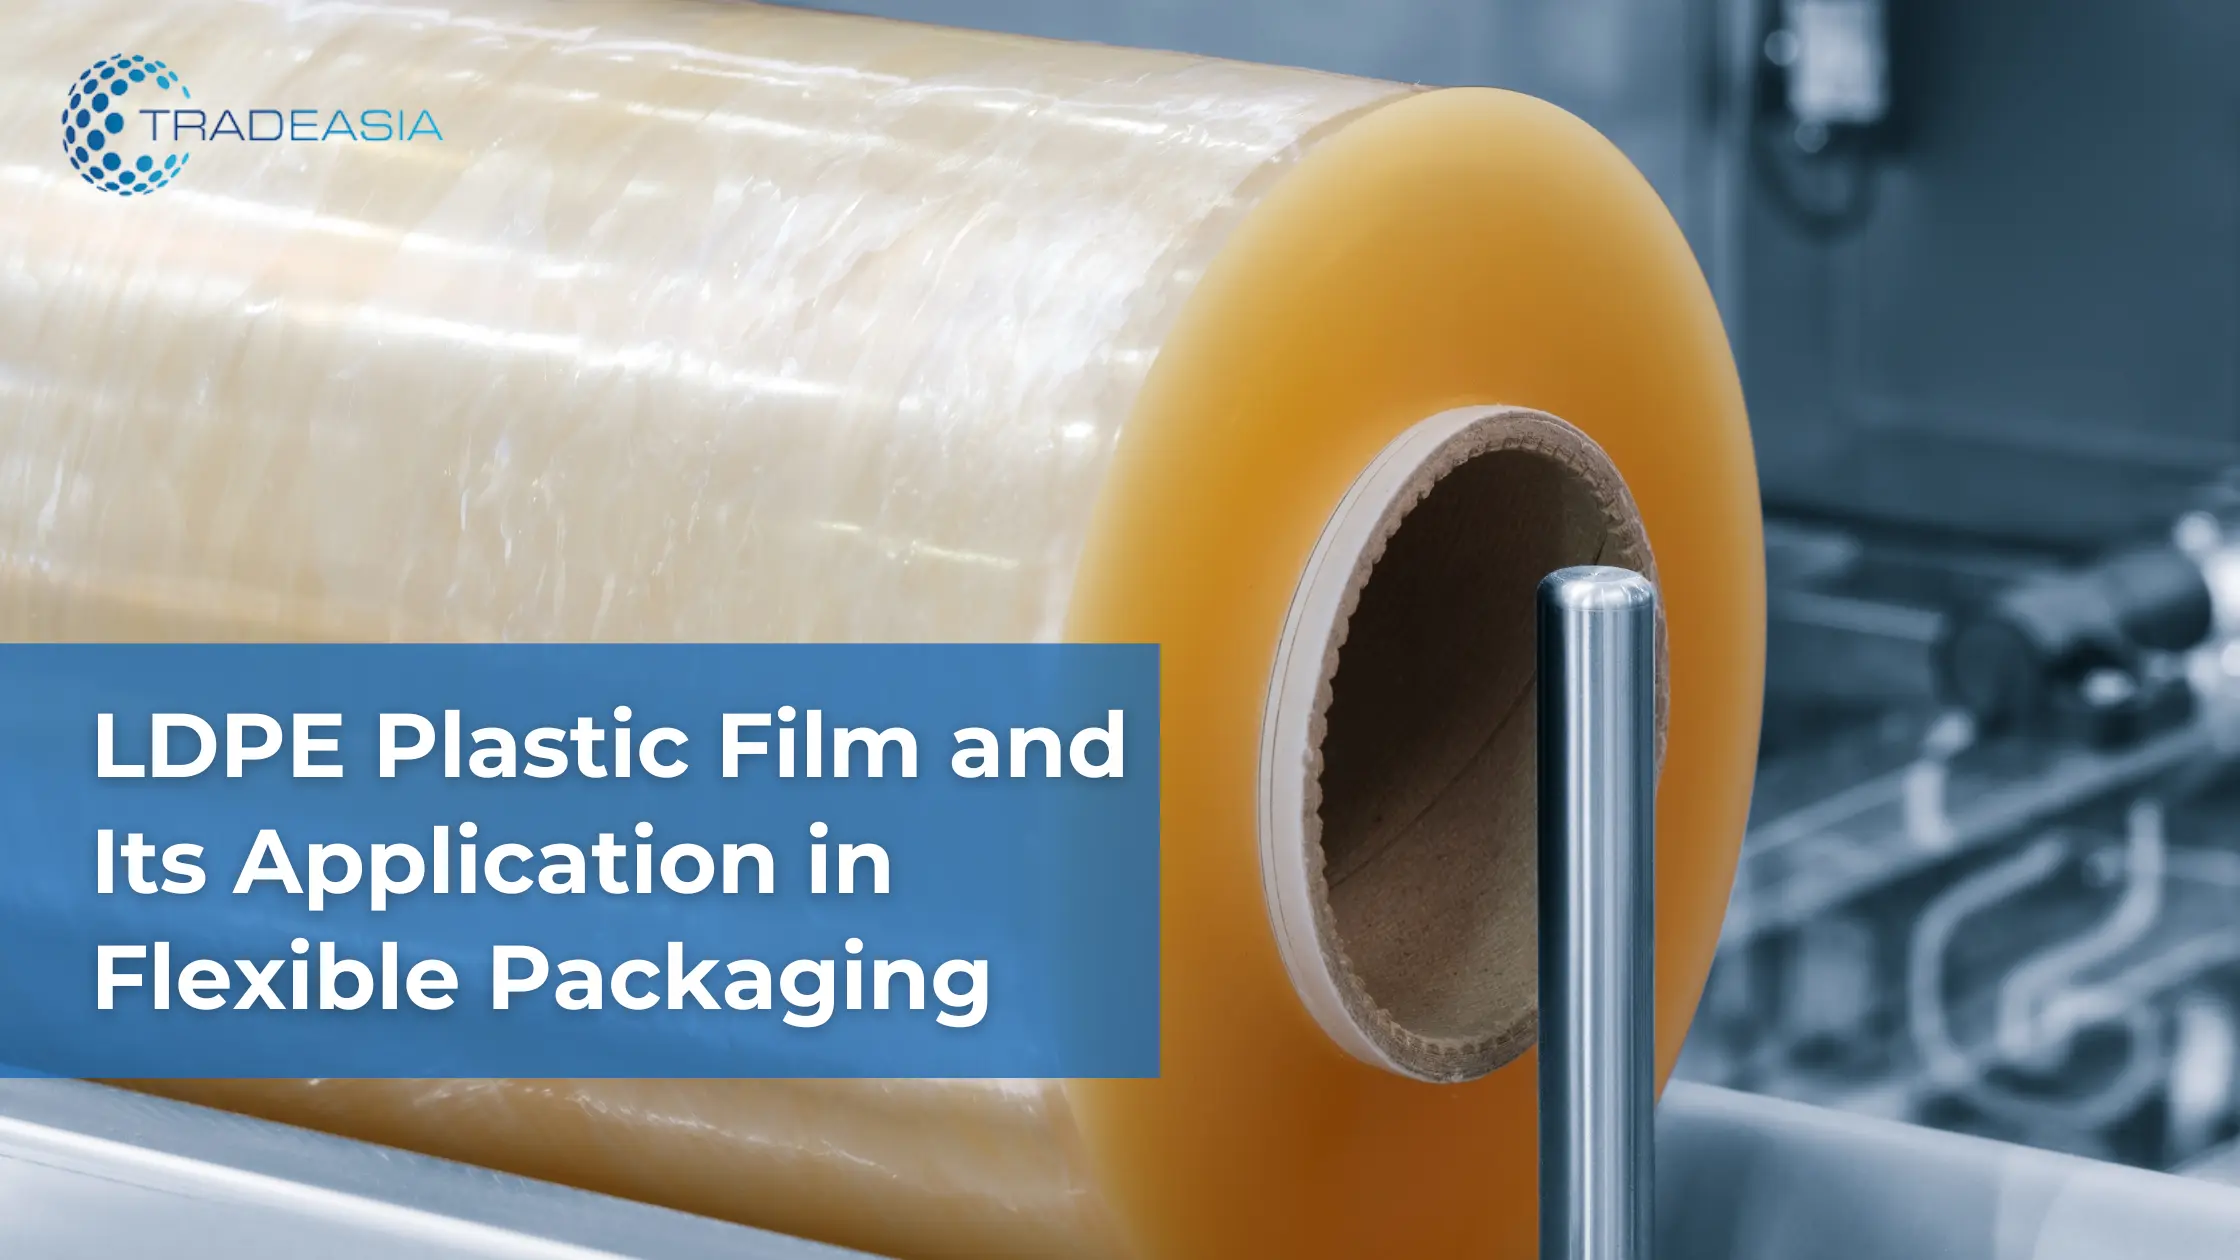 LDPE Plastic Film and Its Application in Flexible Packaging